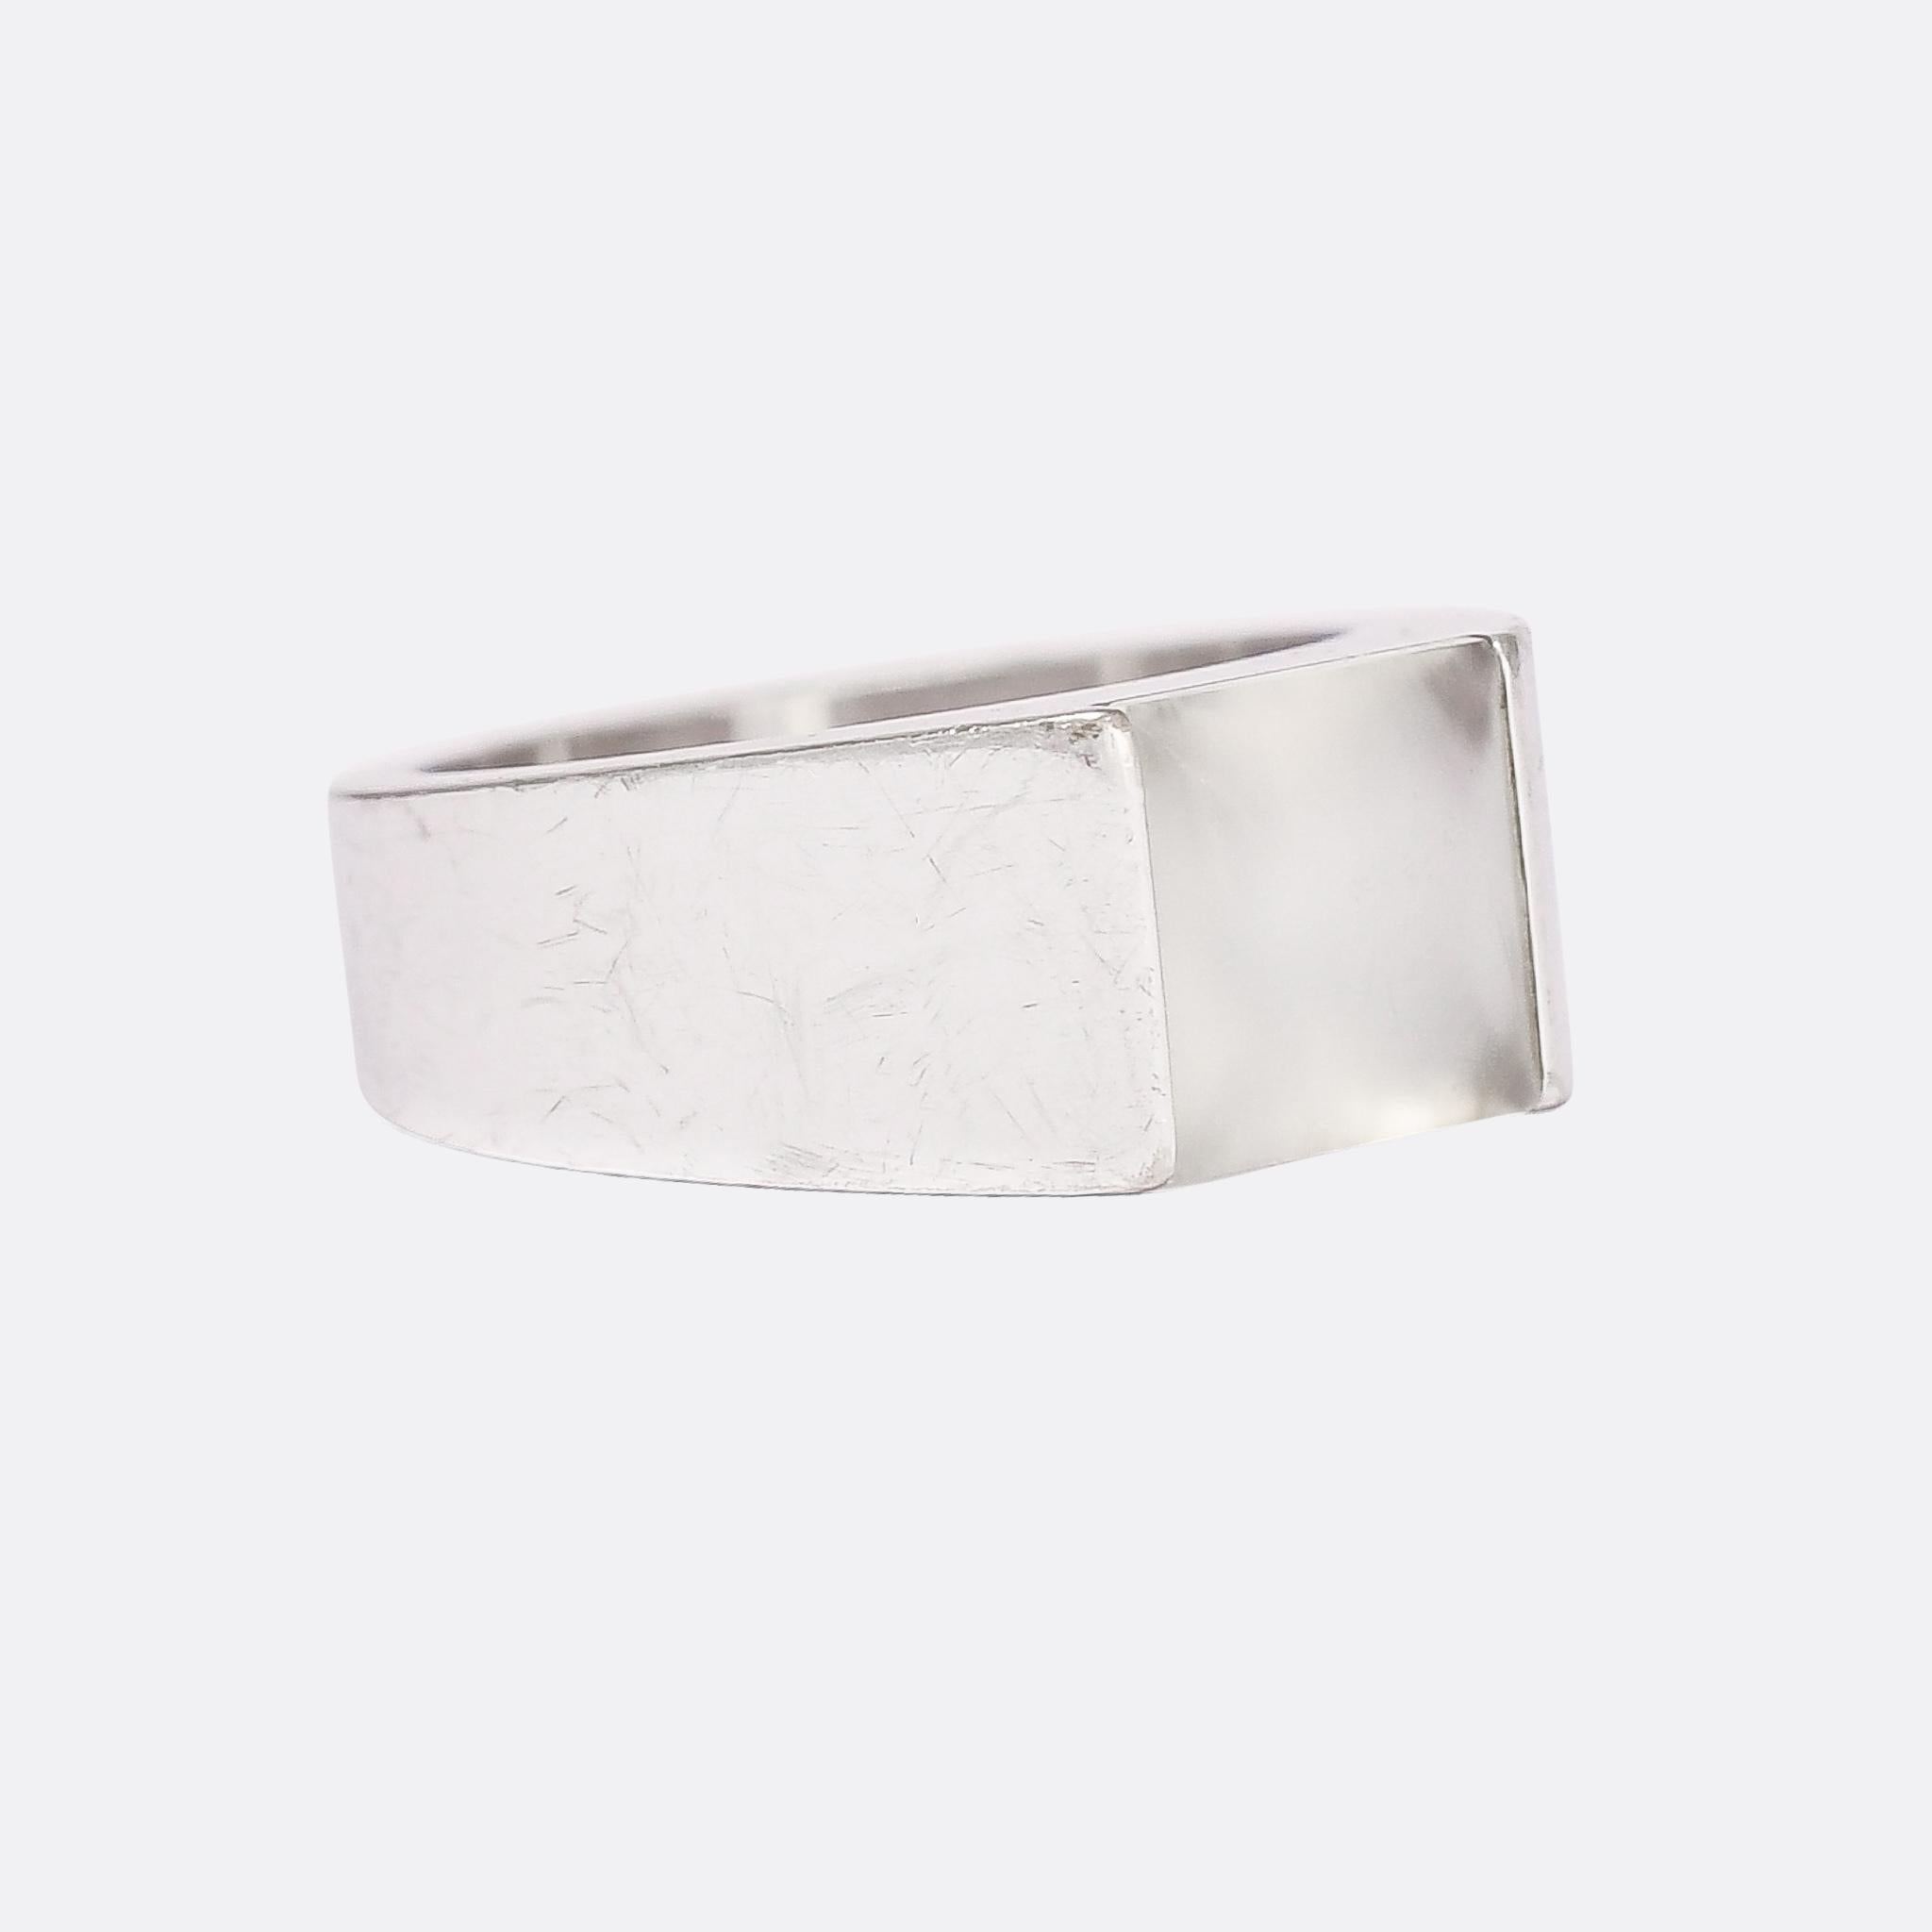 A cool vintage Cartier signet ring dating from the 1990s. The head is set with an unusually cut white moonstone, square in shape, with a shallow cabochon top and four pavilion facets underneath. It's beautifully made, crafted in 18 karat white gold